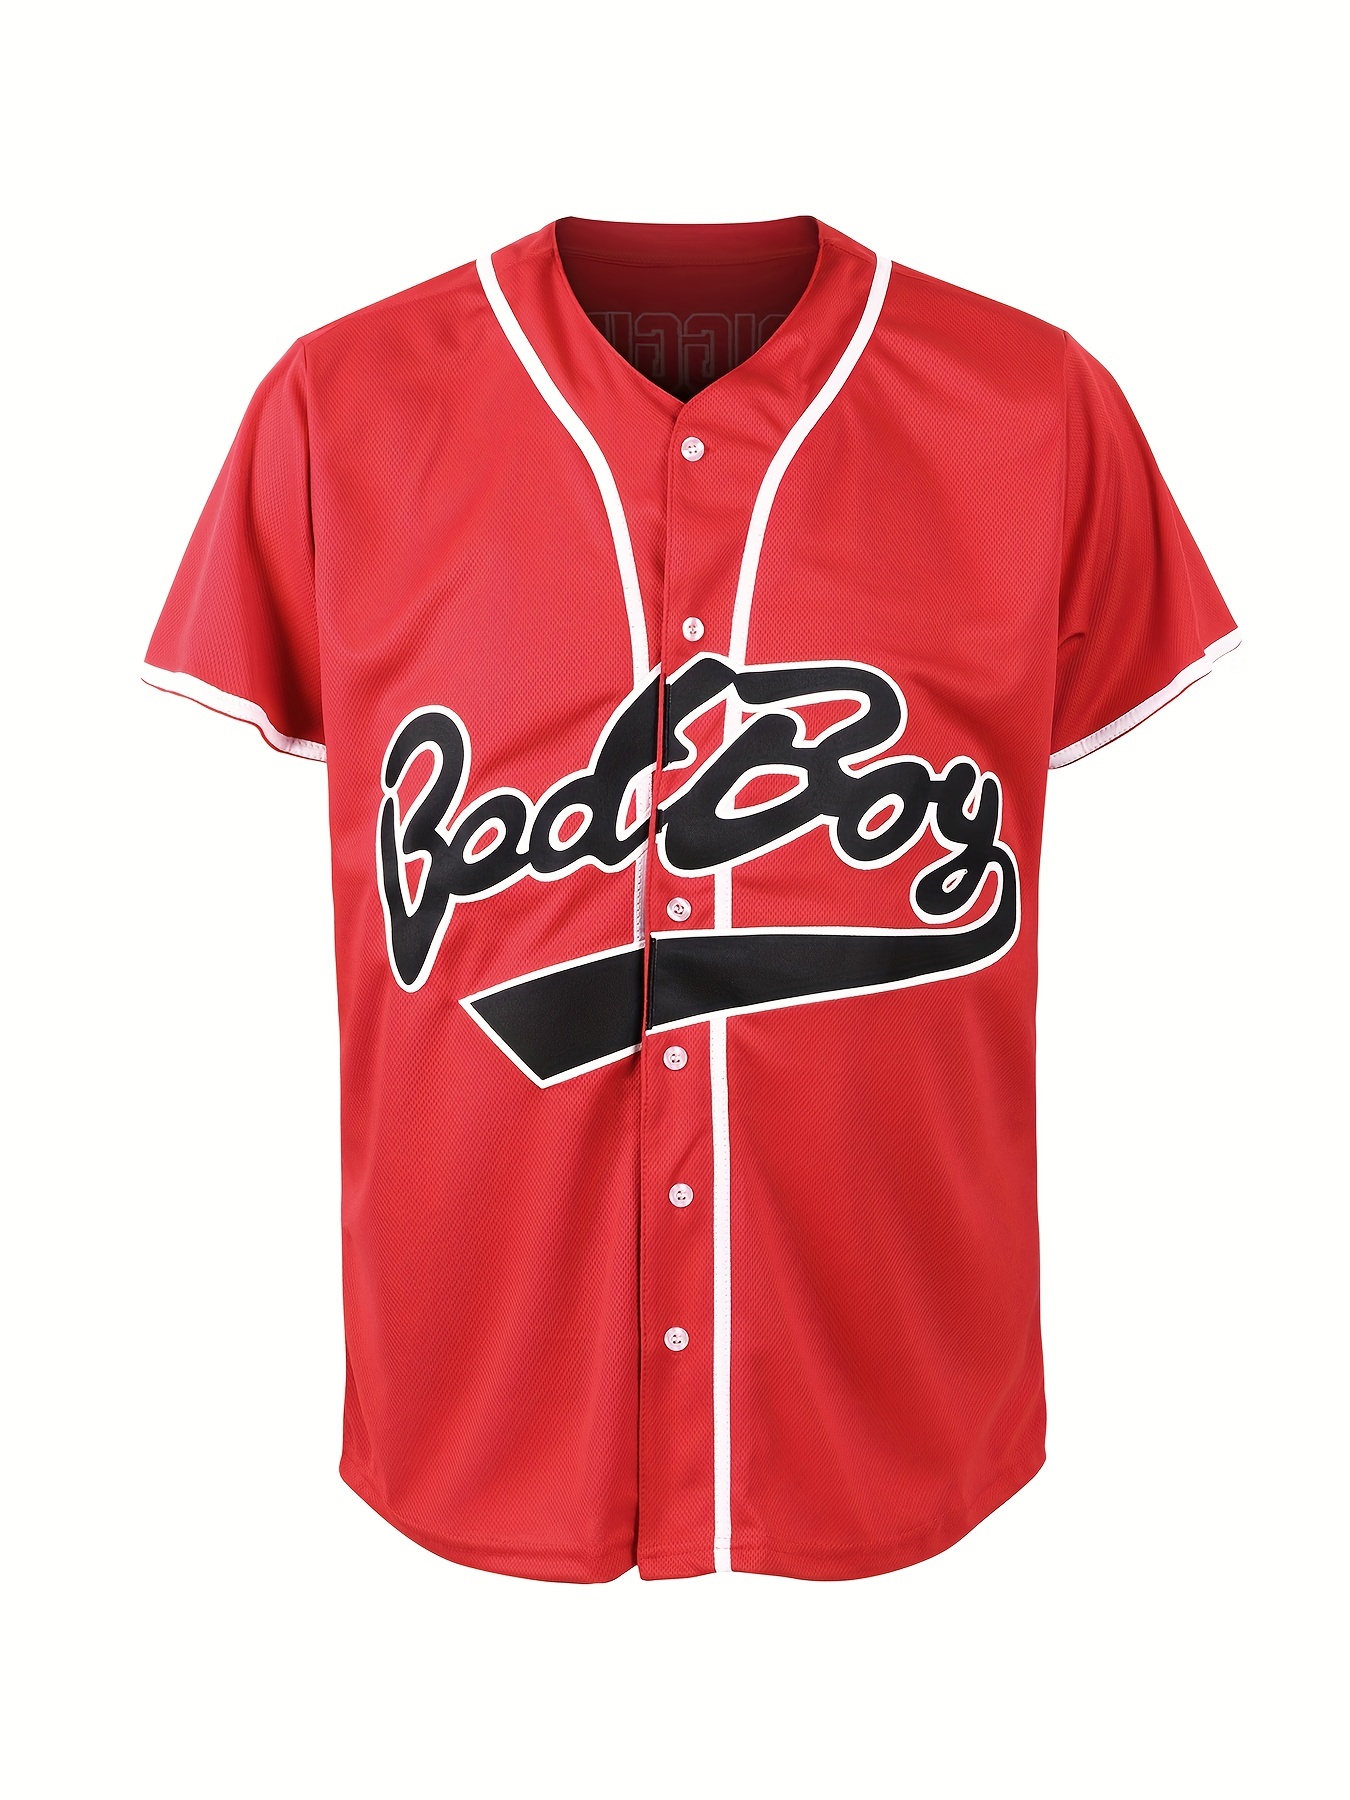 Men's Classic Design #10 Baseball Jersey, Athletic Button Up Short Sleeve Baseball Shirt for Training Competition S-XXXL,Temu